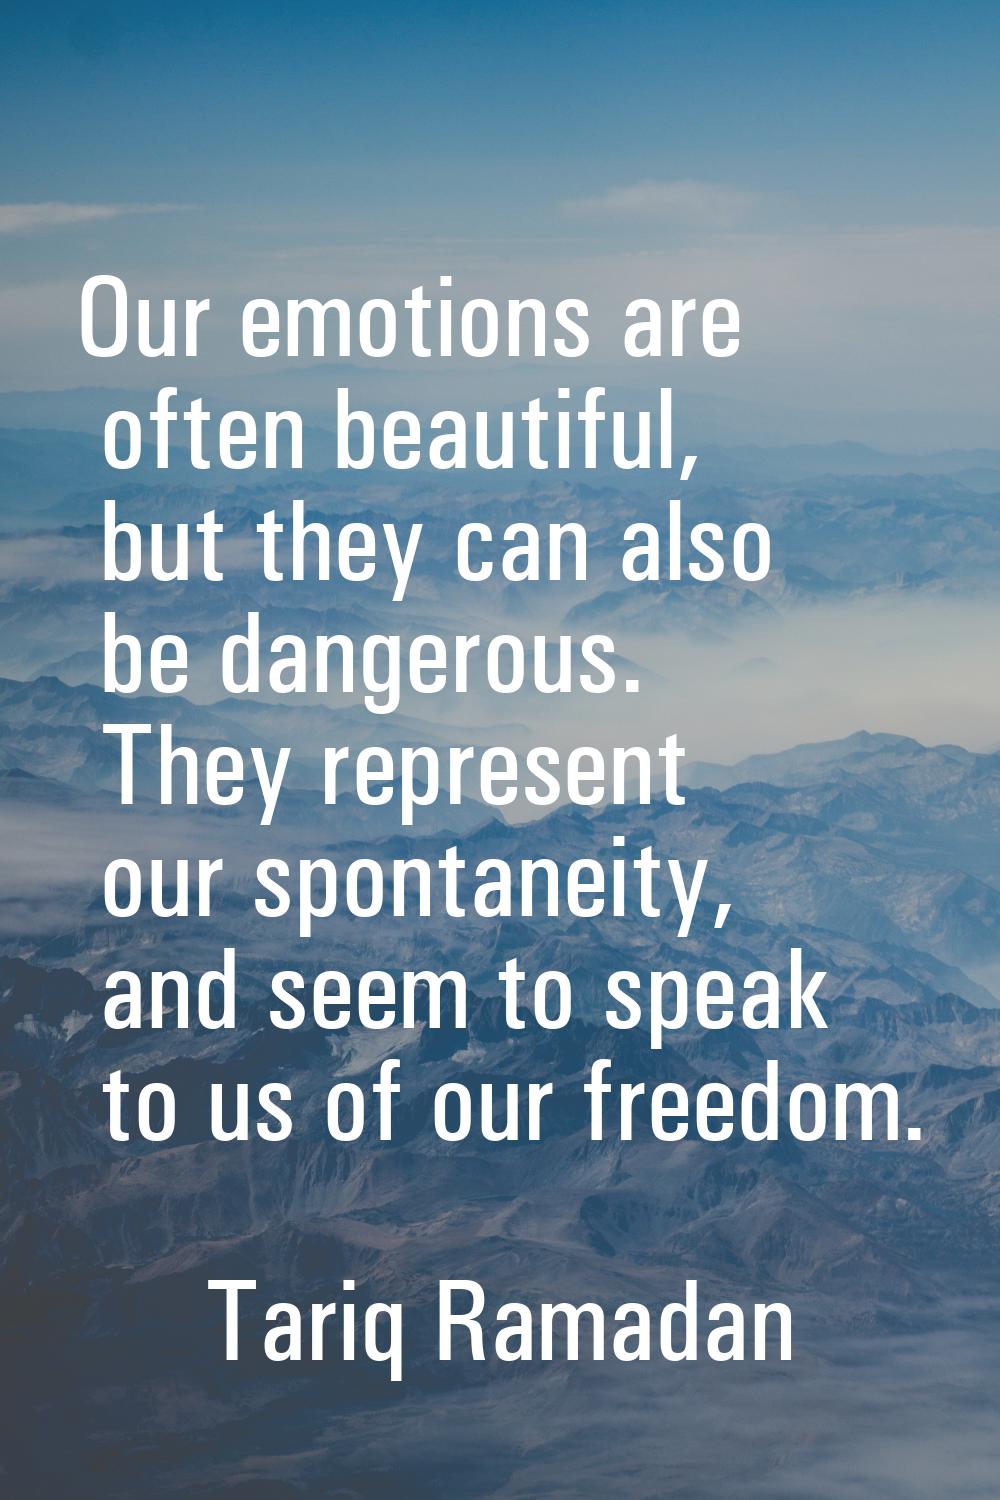 Our emotions are often beautiful, but they can also be dangerous. They represent our spontaneity, a